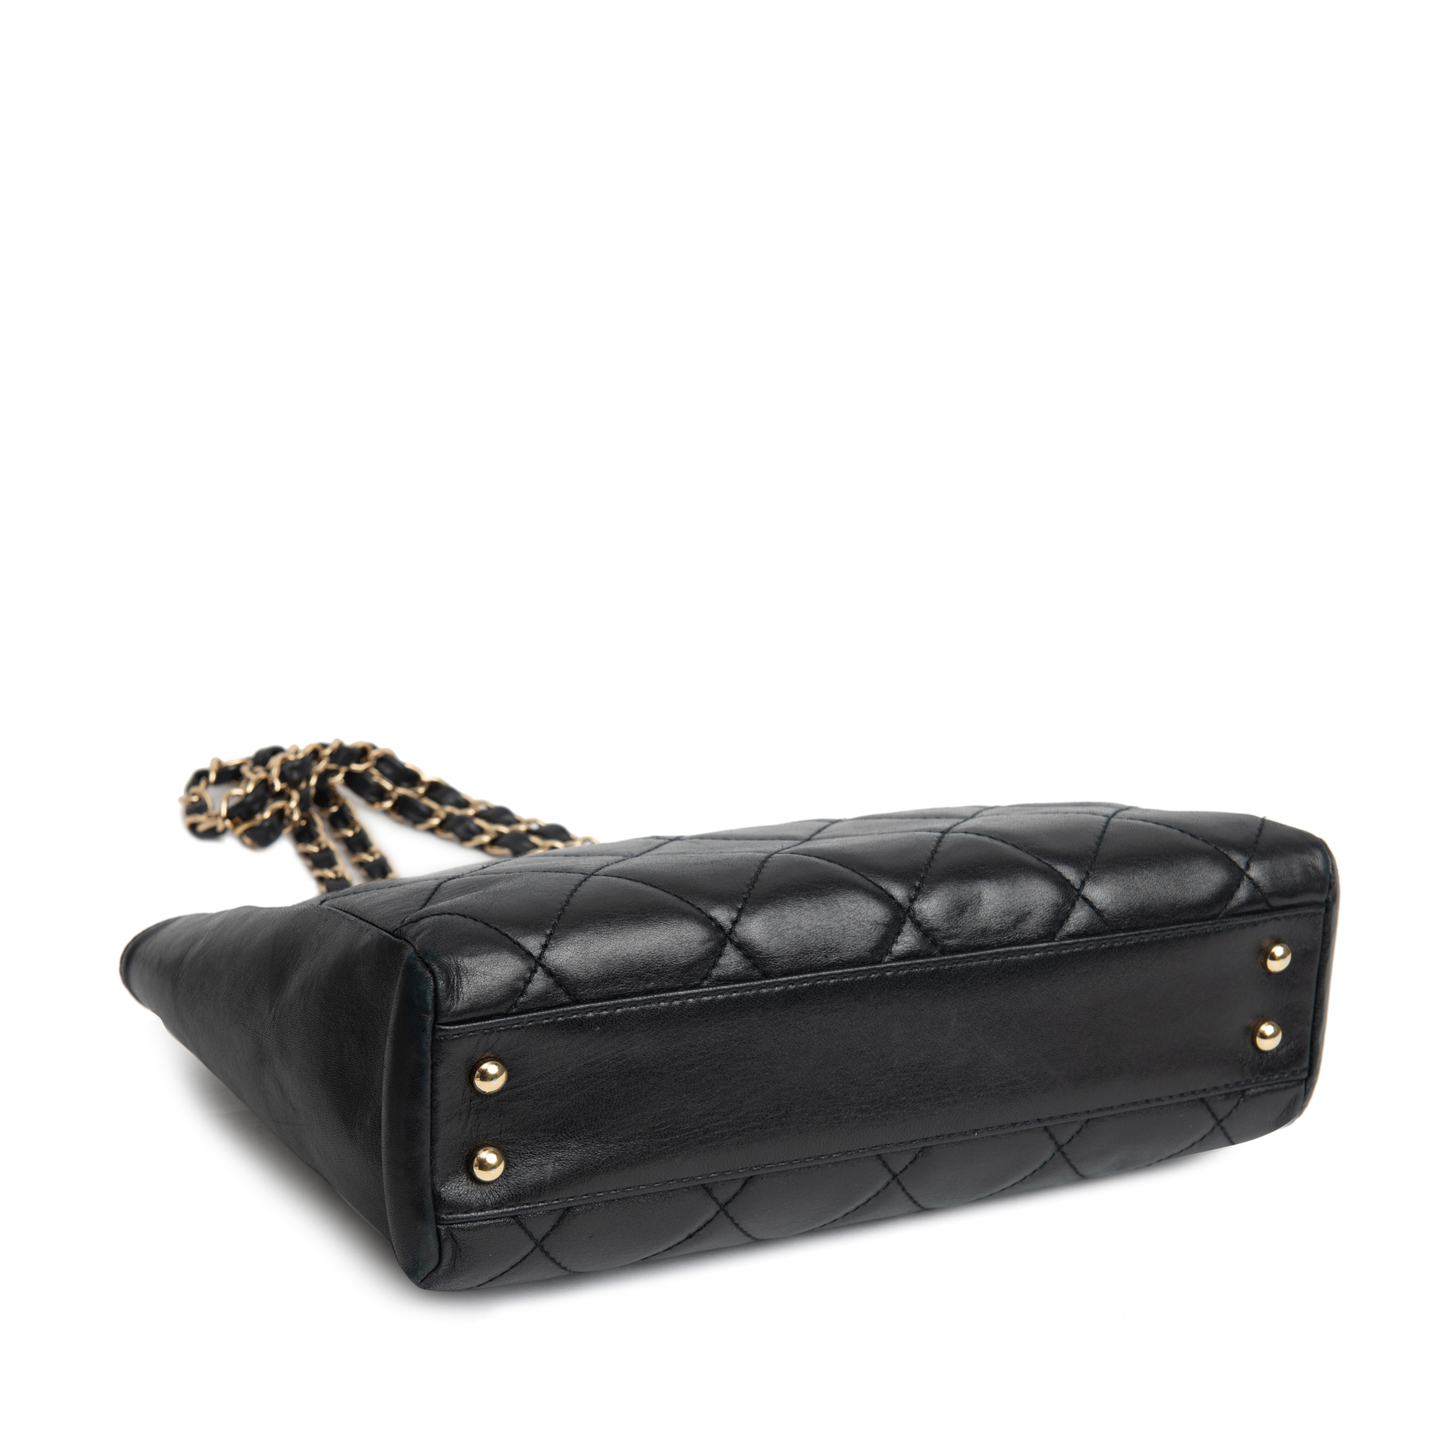 Chanel Black Quilted Lambskin Leather Shoulder Bag - LabelCentric